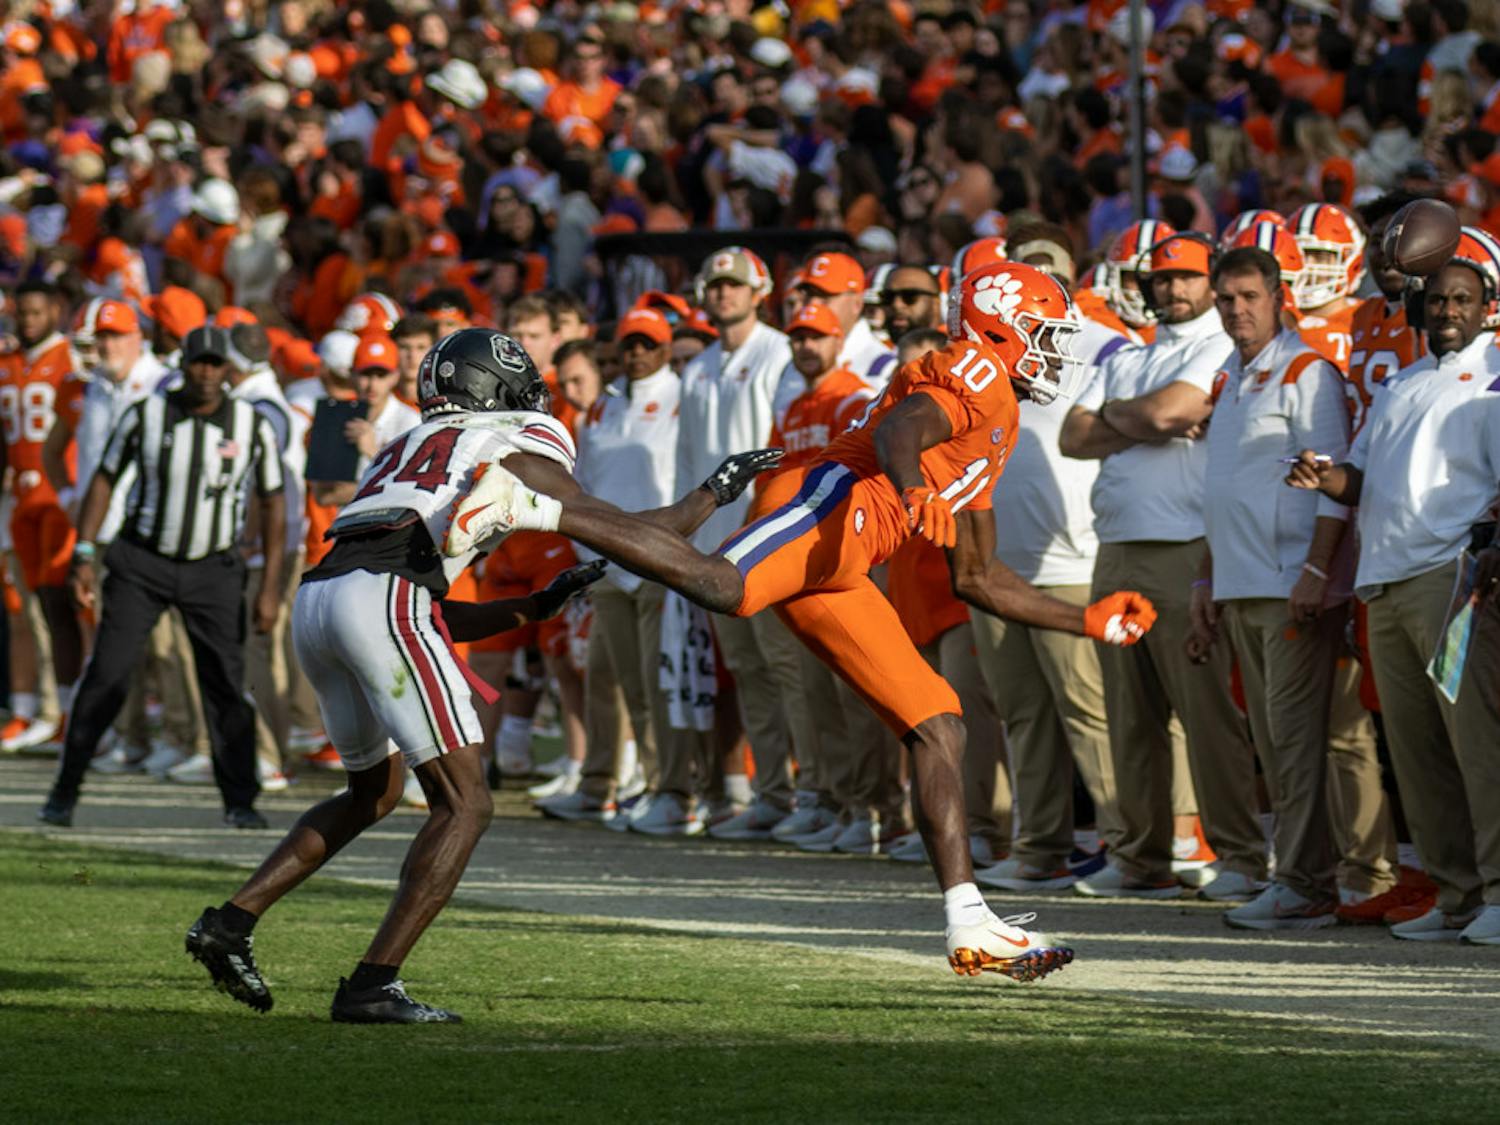 Redshirt junior Marcellas Dial covers a Clemson receiver on Nov. 26, 2022 at Memorial Stadium. Dial defended four passes overall against Clemson.